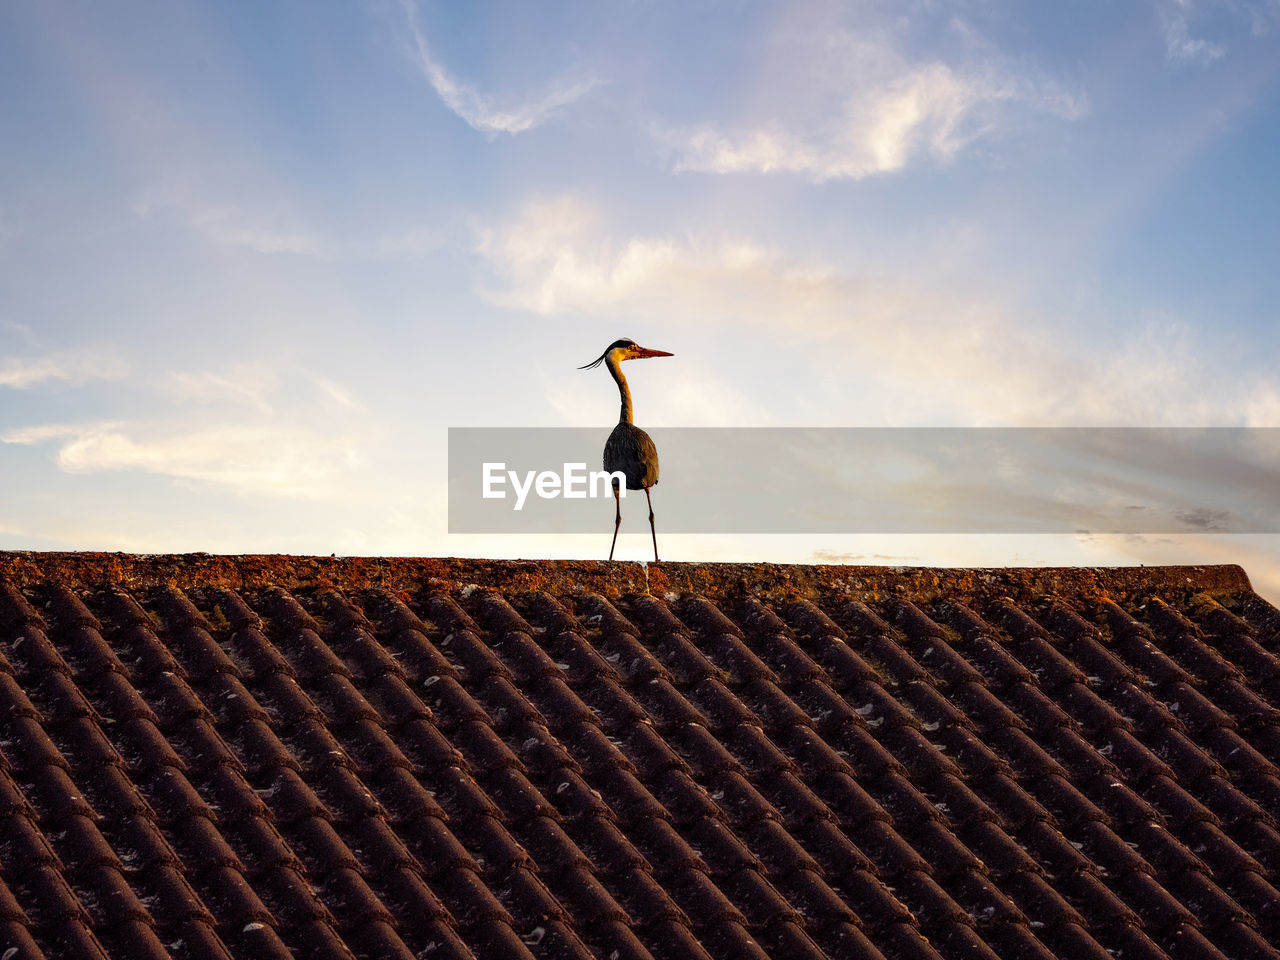 Heron on the roof in the morning